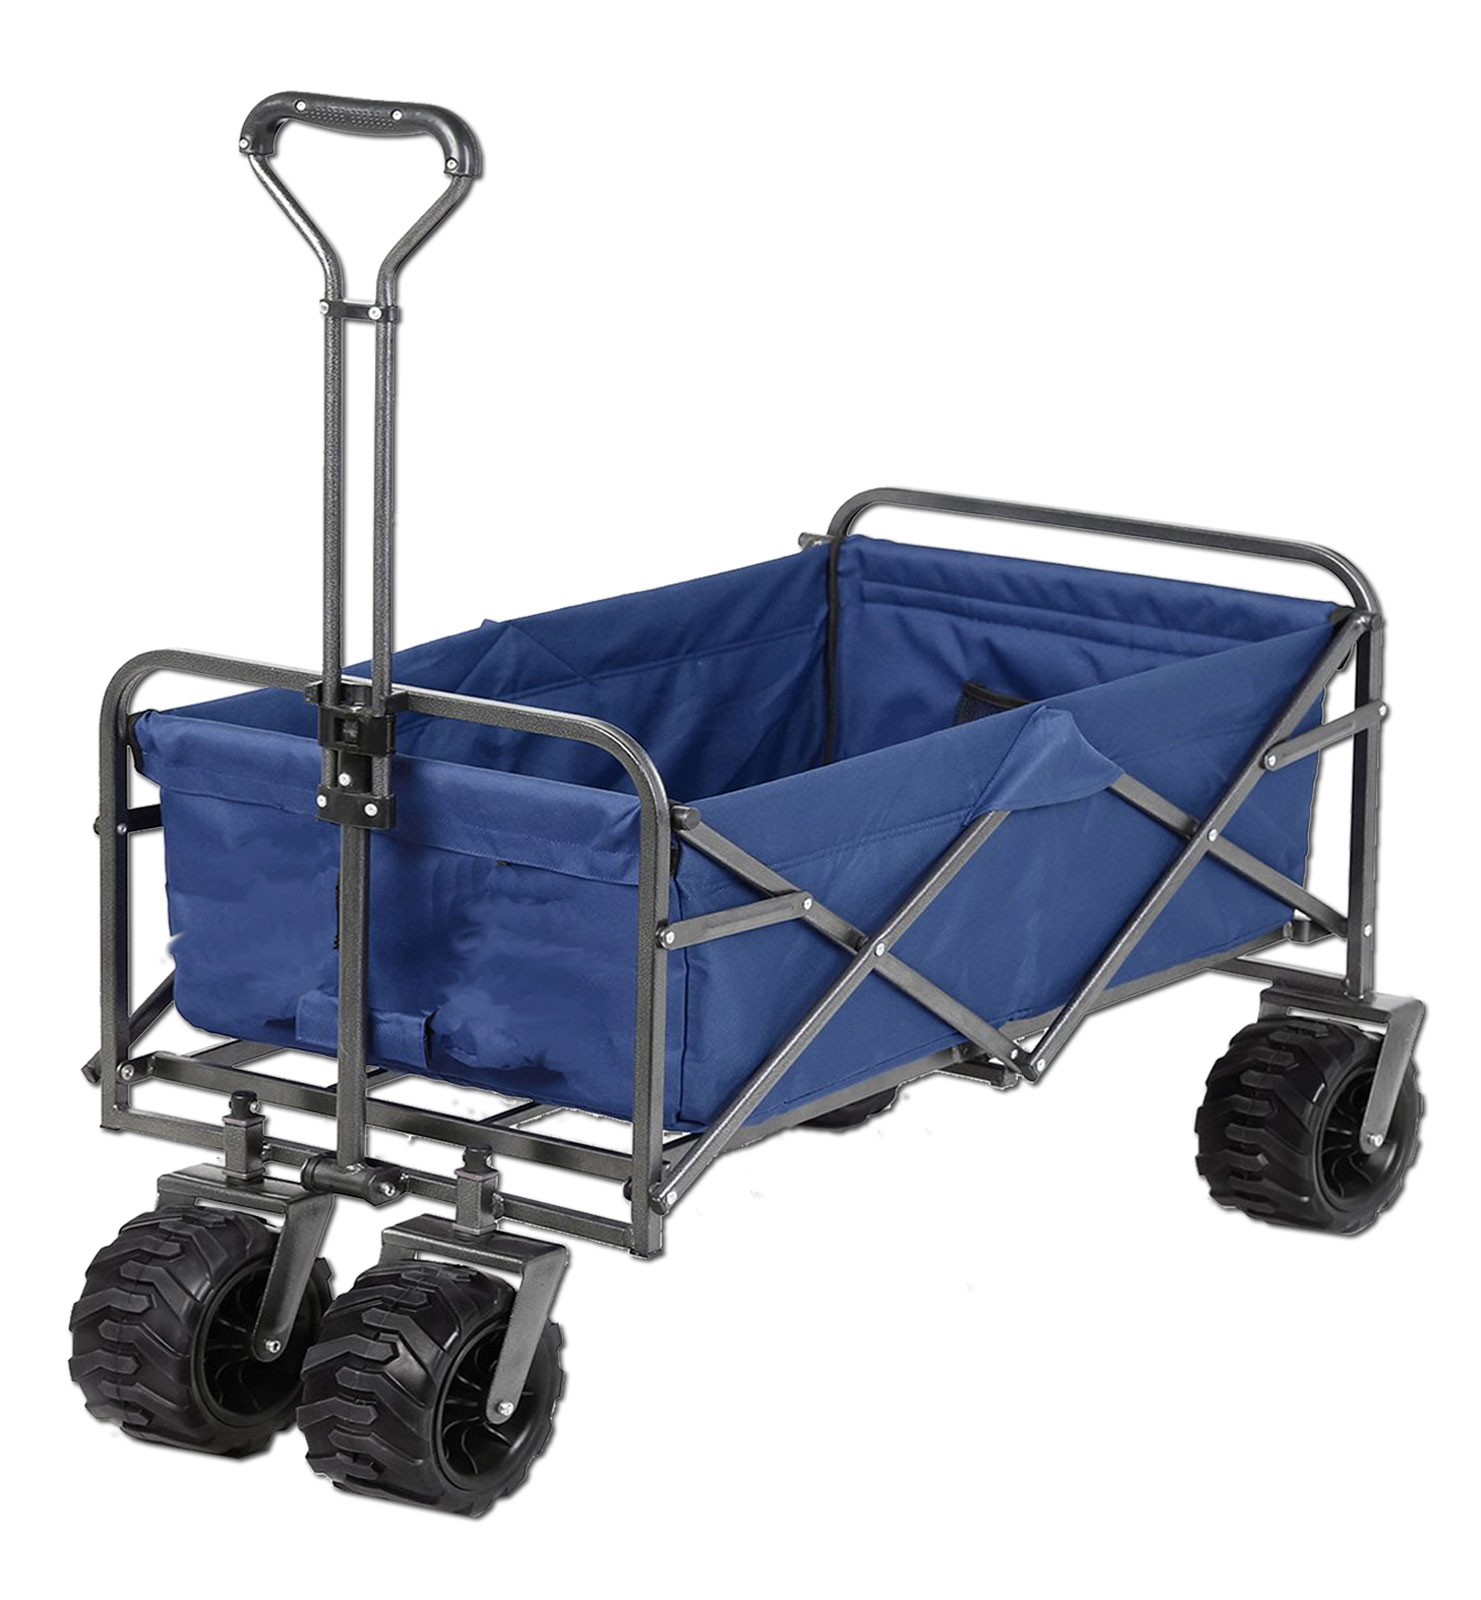 Blue Timber Ridge Camping Wagon Folding Garden Cart Shopping Trolley Collapsible Heavy Duty Utility Use Side Bag 